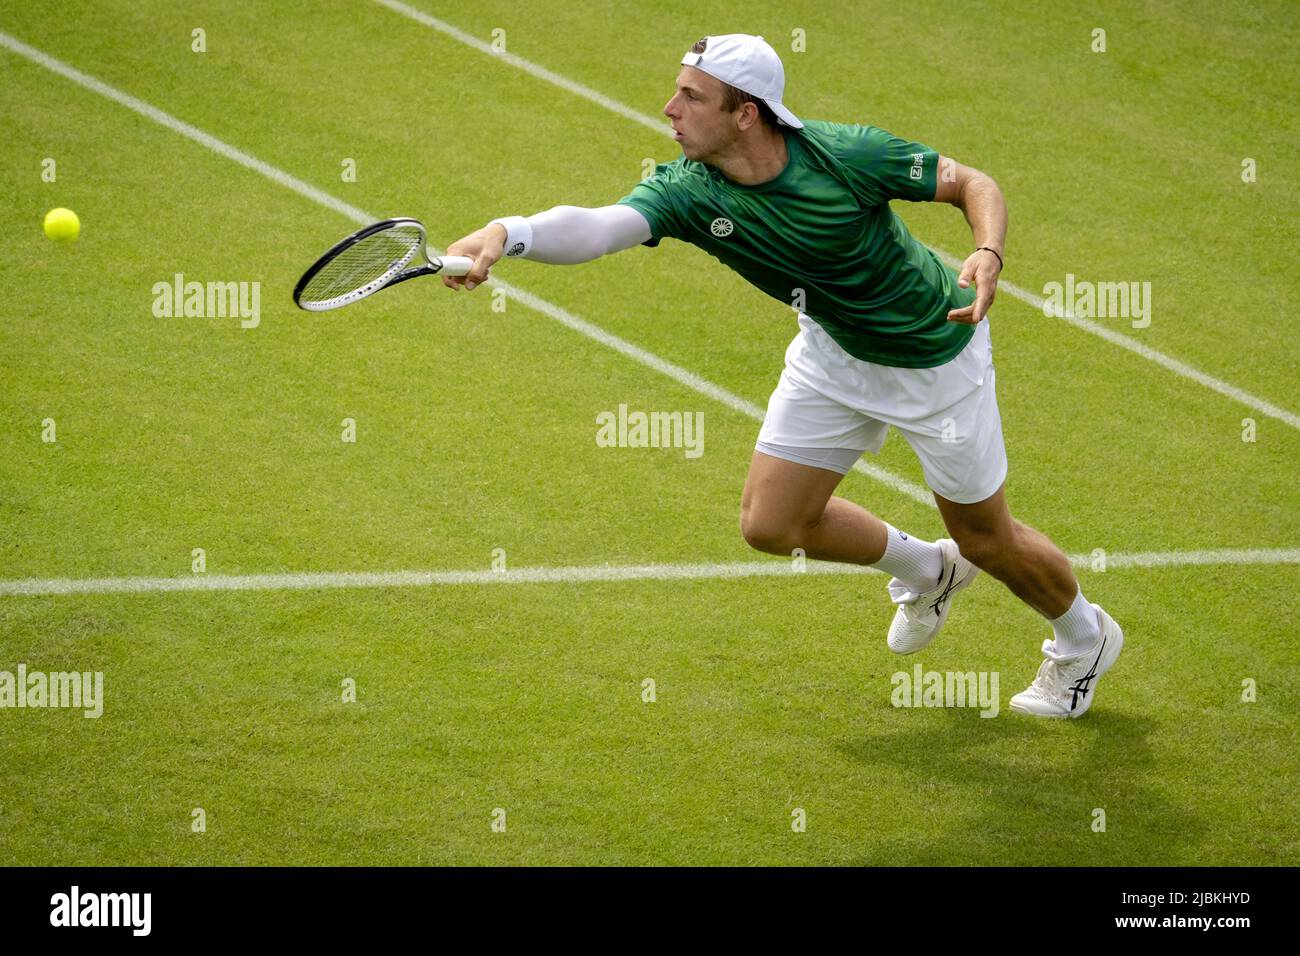 ROSMALEN - Tennis player Tallon Groet at the international tennis tournament Libema Open. The combined Dutch tennis tournament for men and women will be held on the grass courts of Autotron for twelve days. ANP SANDER KING Stock Photo